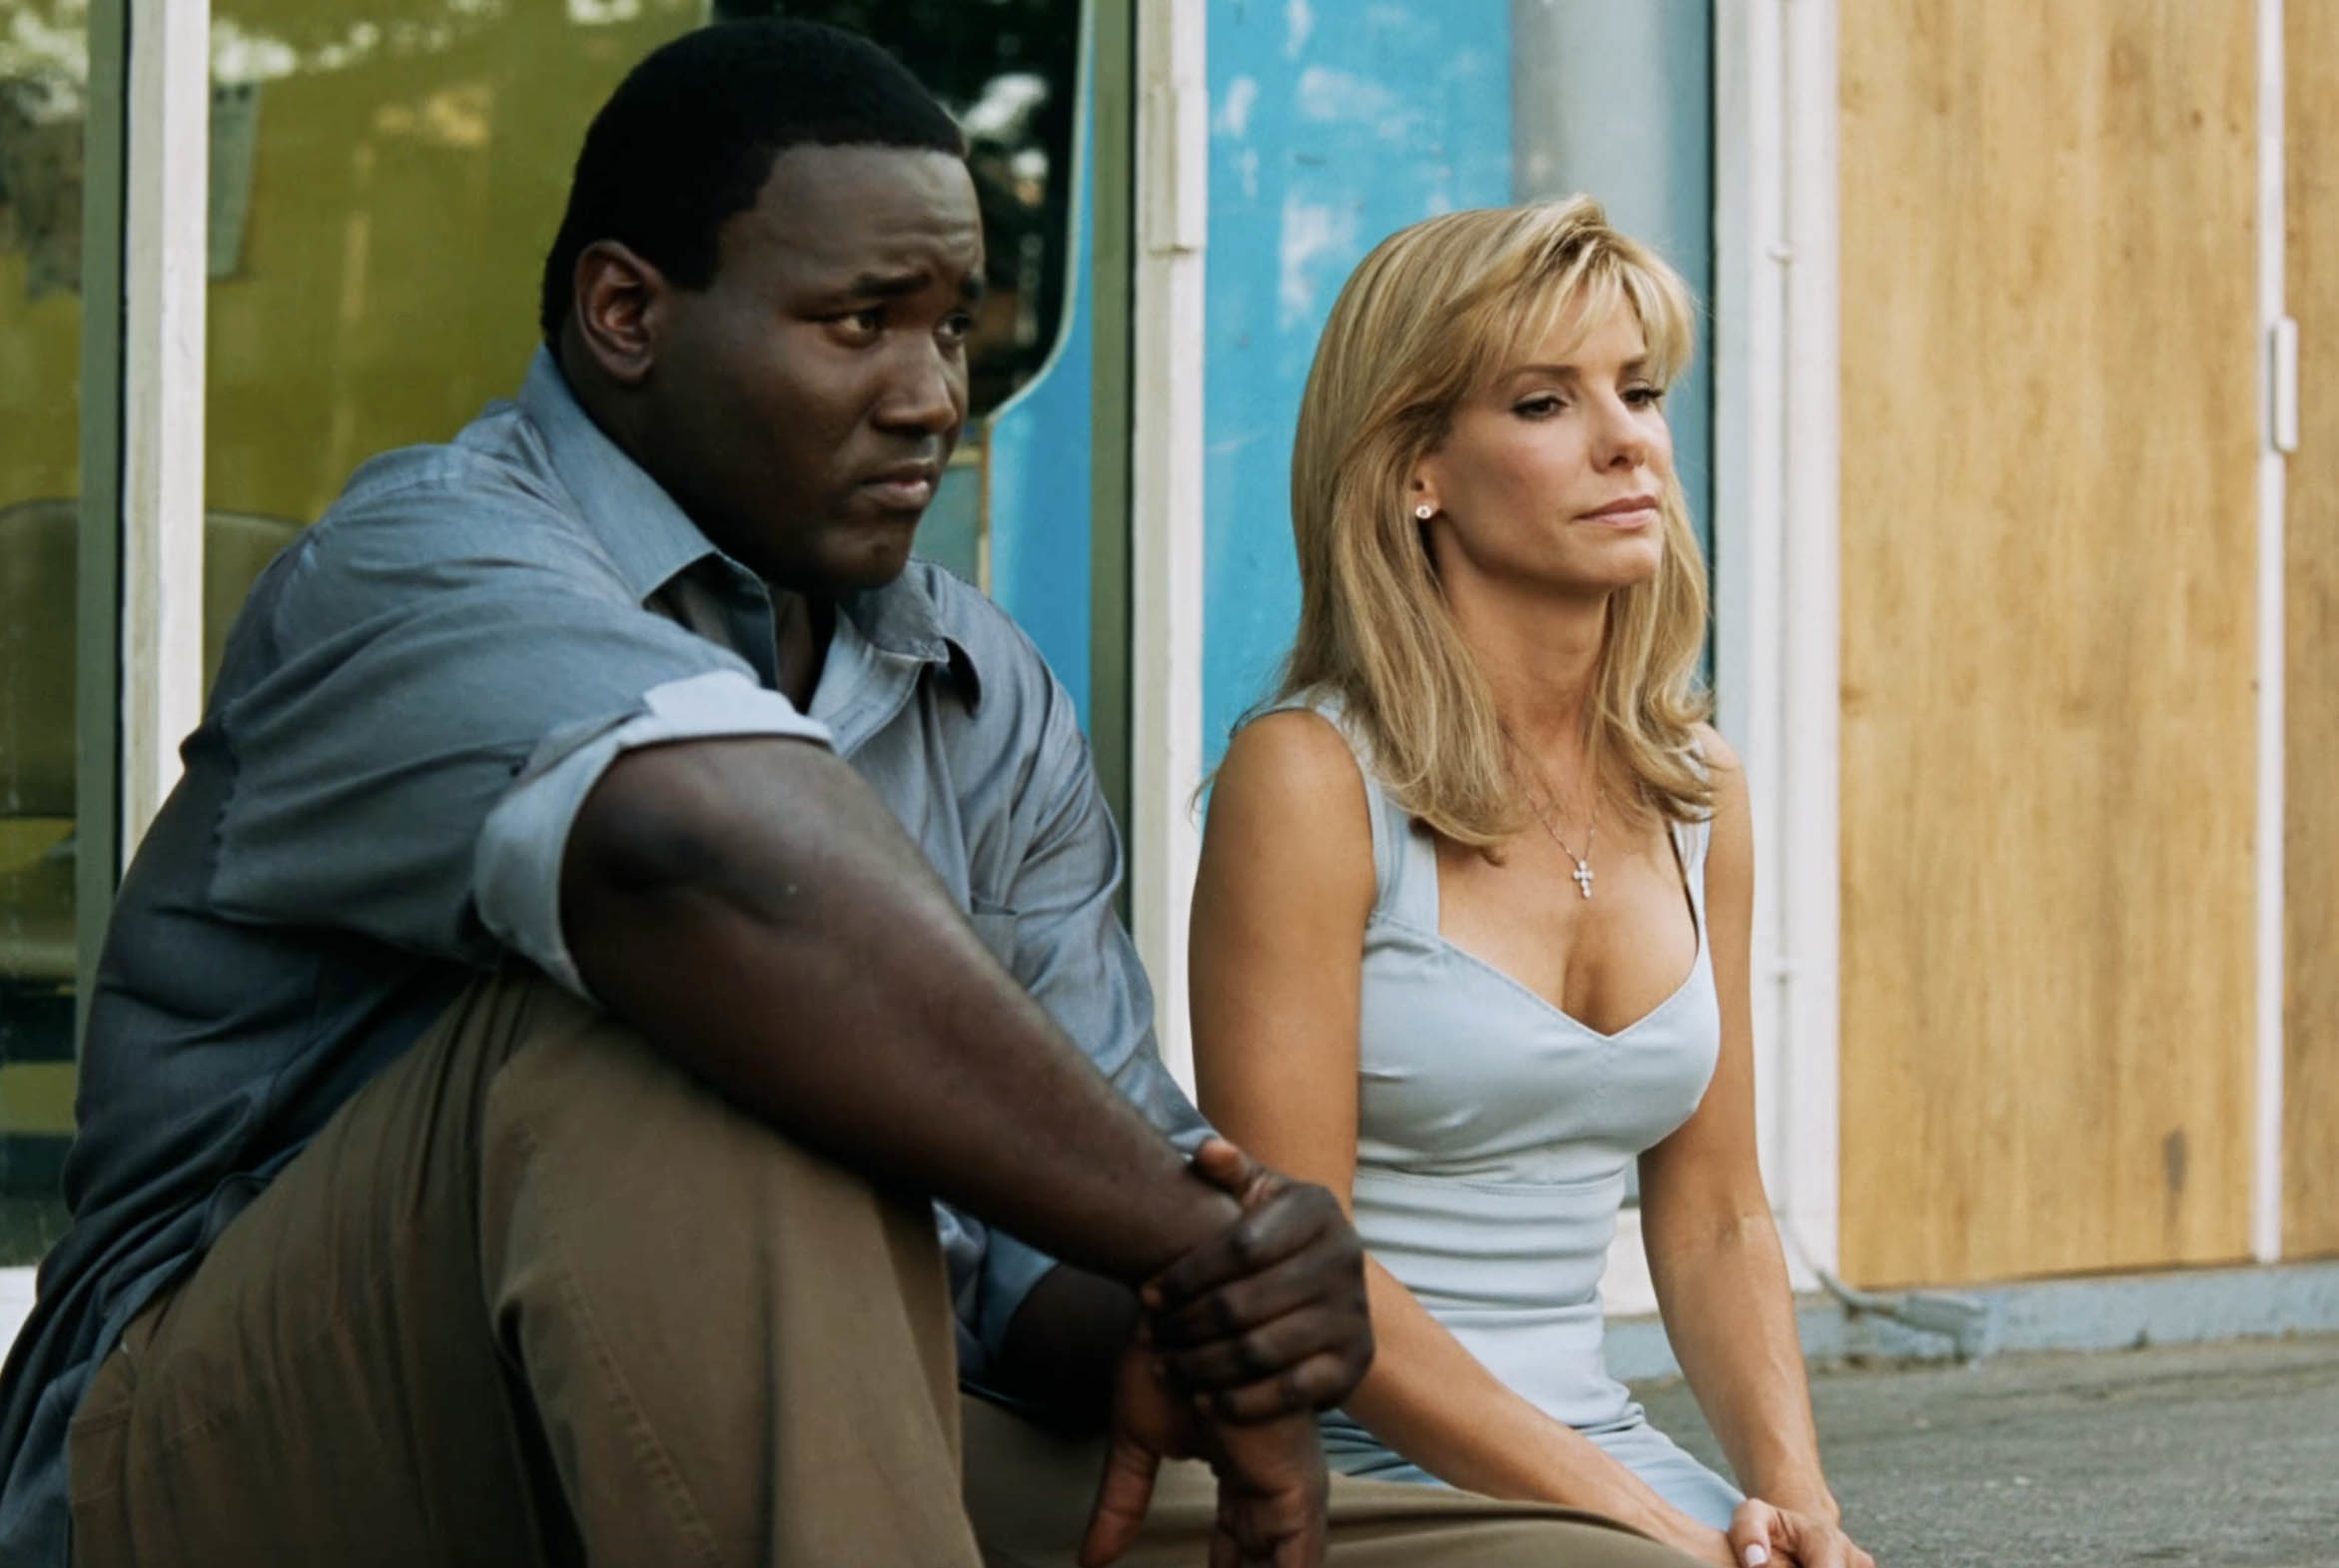 Michael and Leigh Anne Tuohy sitting next to each other in a scene from the film